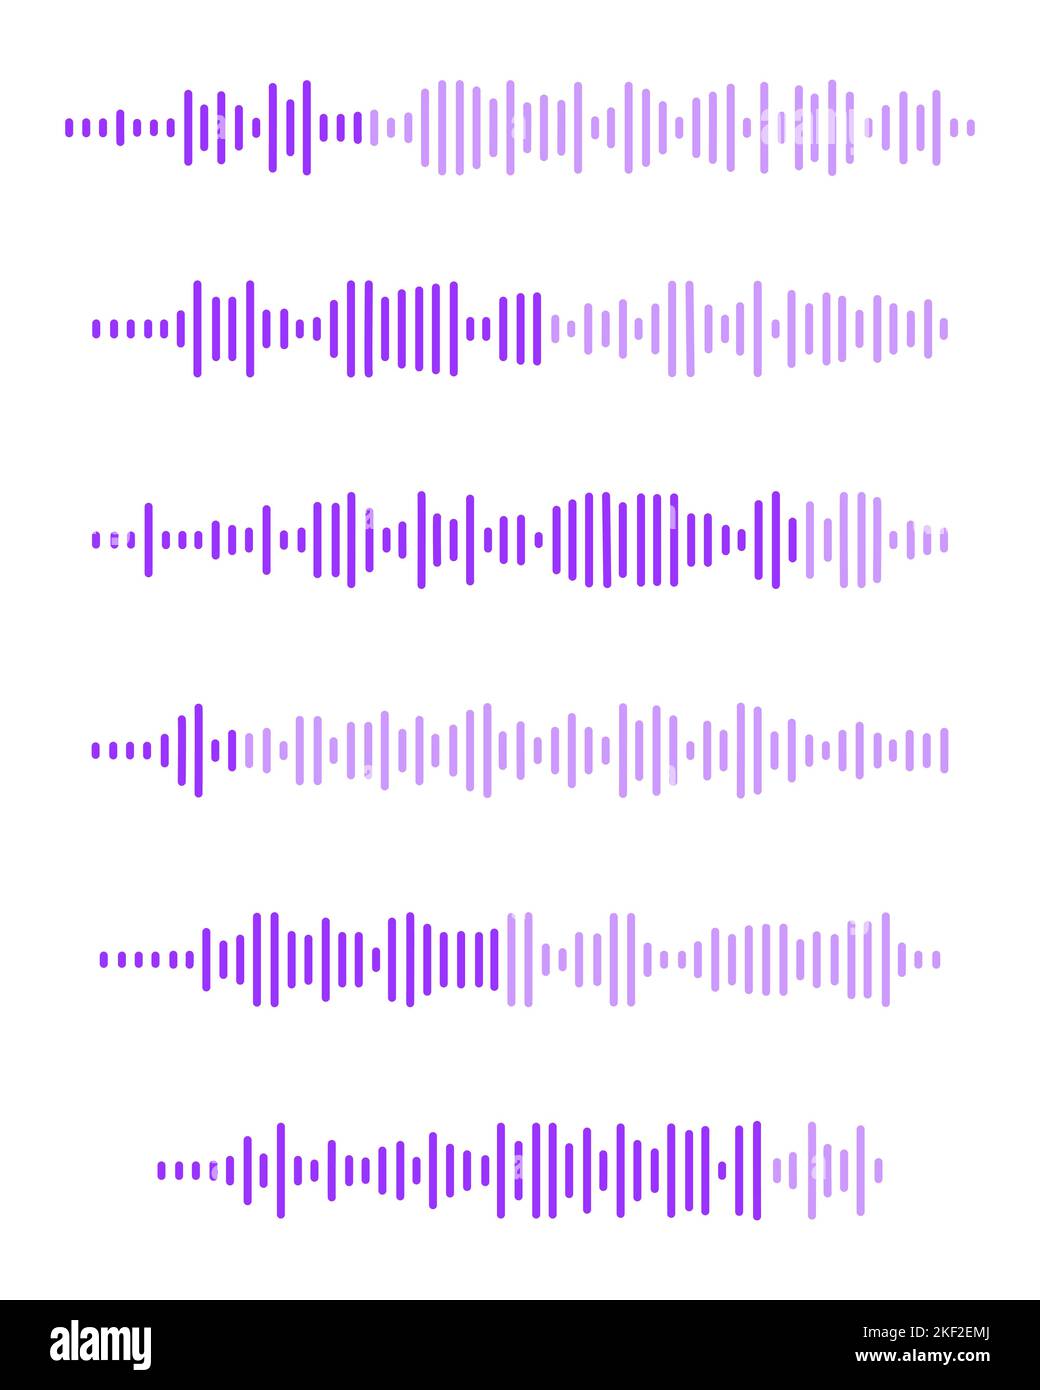 Voice frequency Stock Vector Images - Alamy